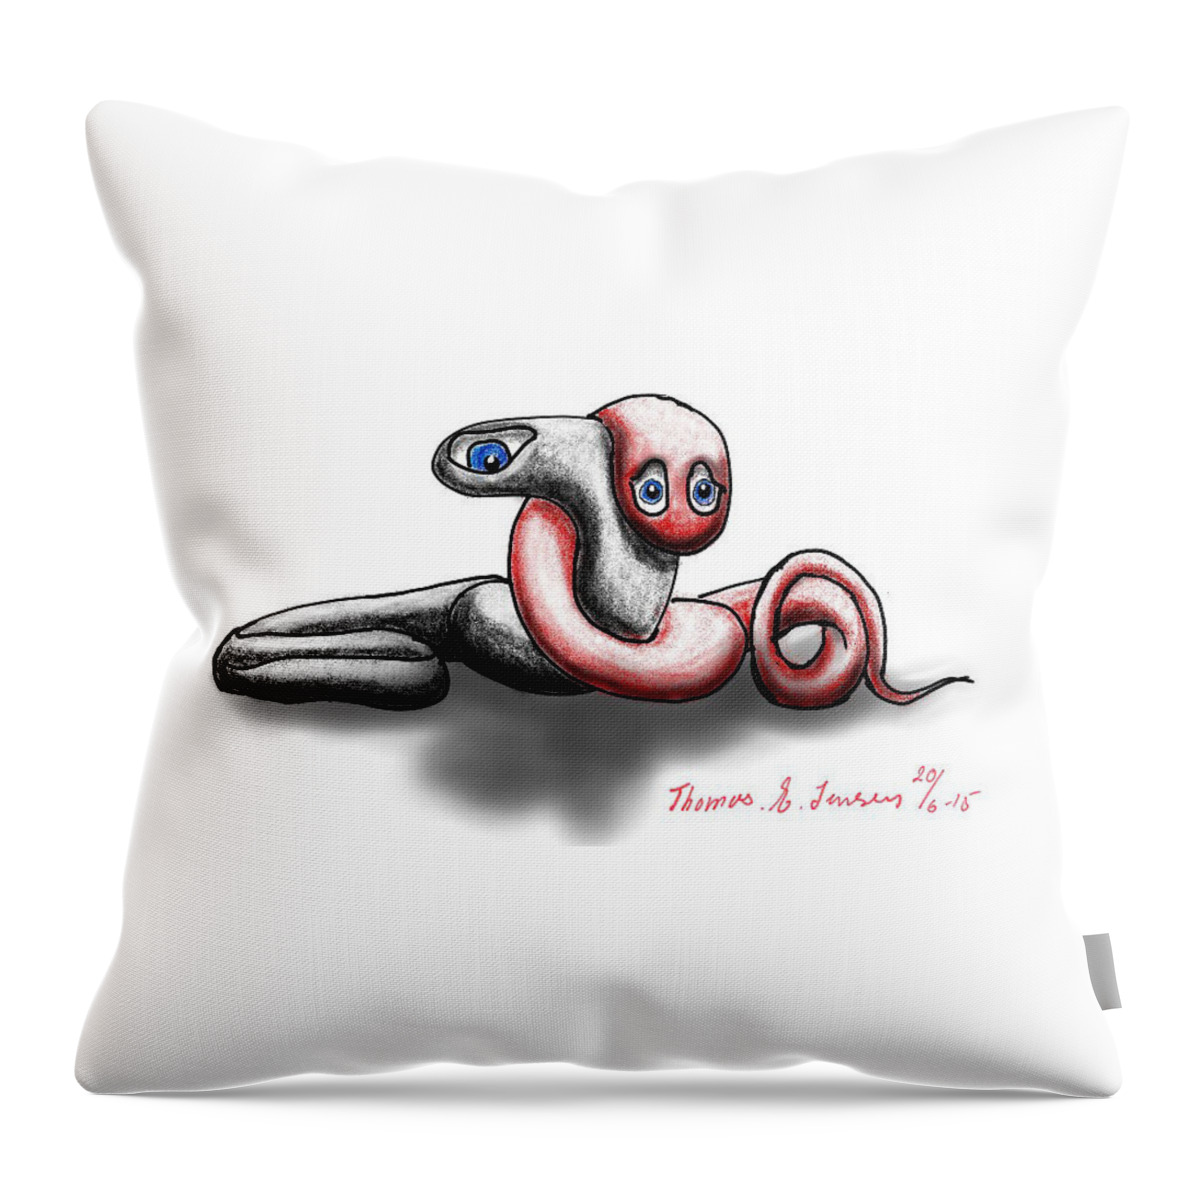 Sketch Throw Pillow featuring the digital art Worm Hug. by ThomasE Jensen